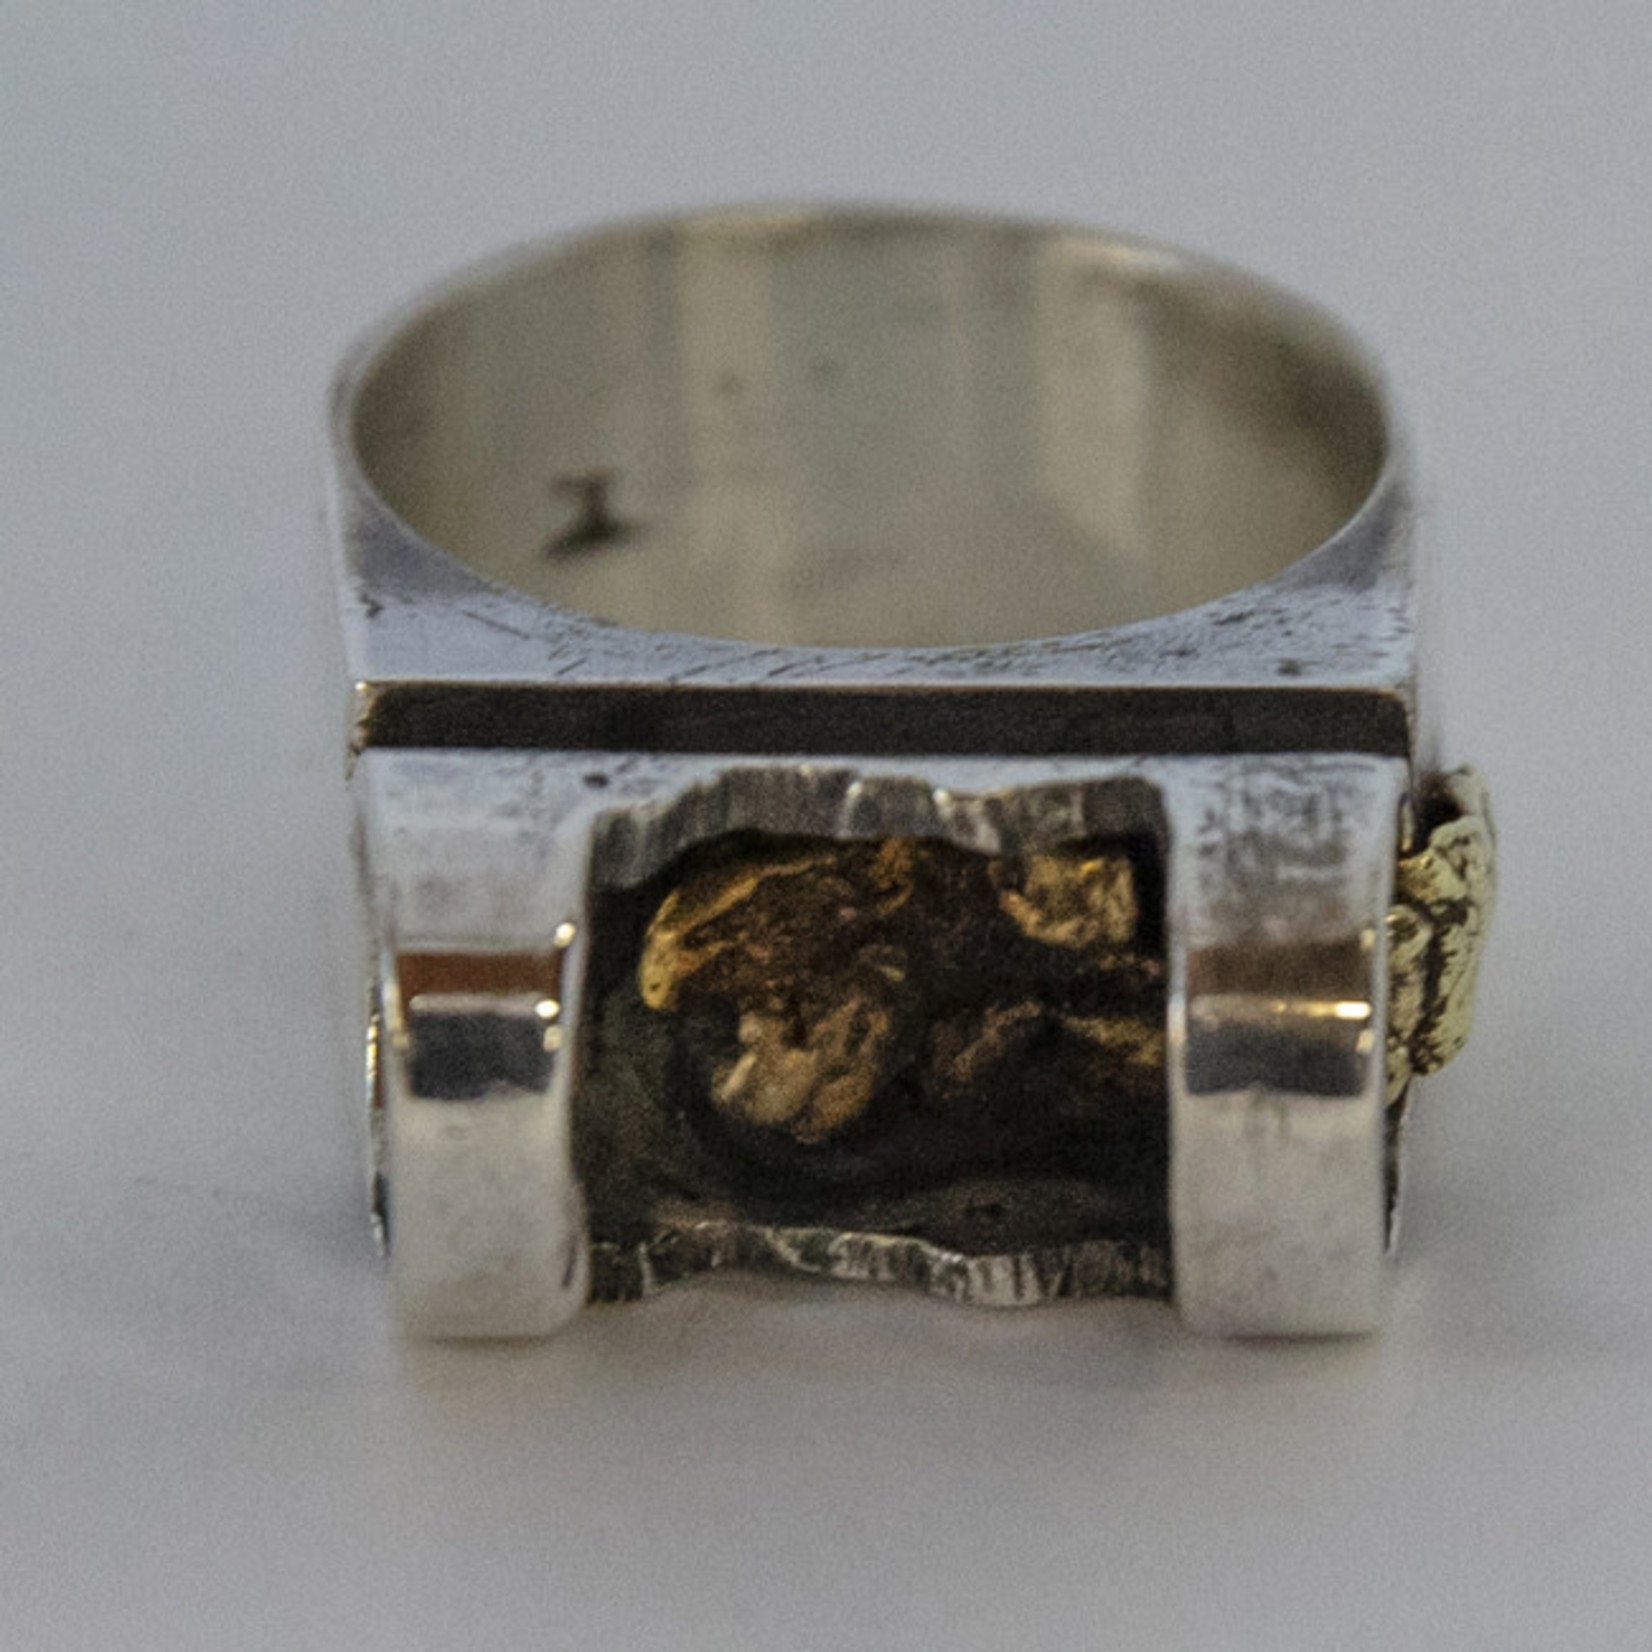 Karl W. Hoffman SILVER/GOLD OXIDIZED RING KWH125-7